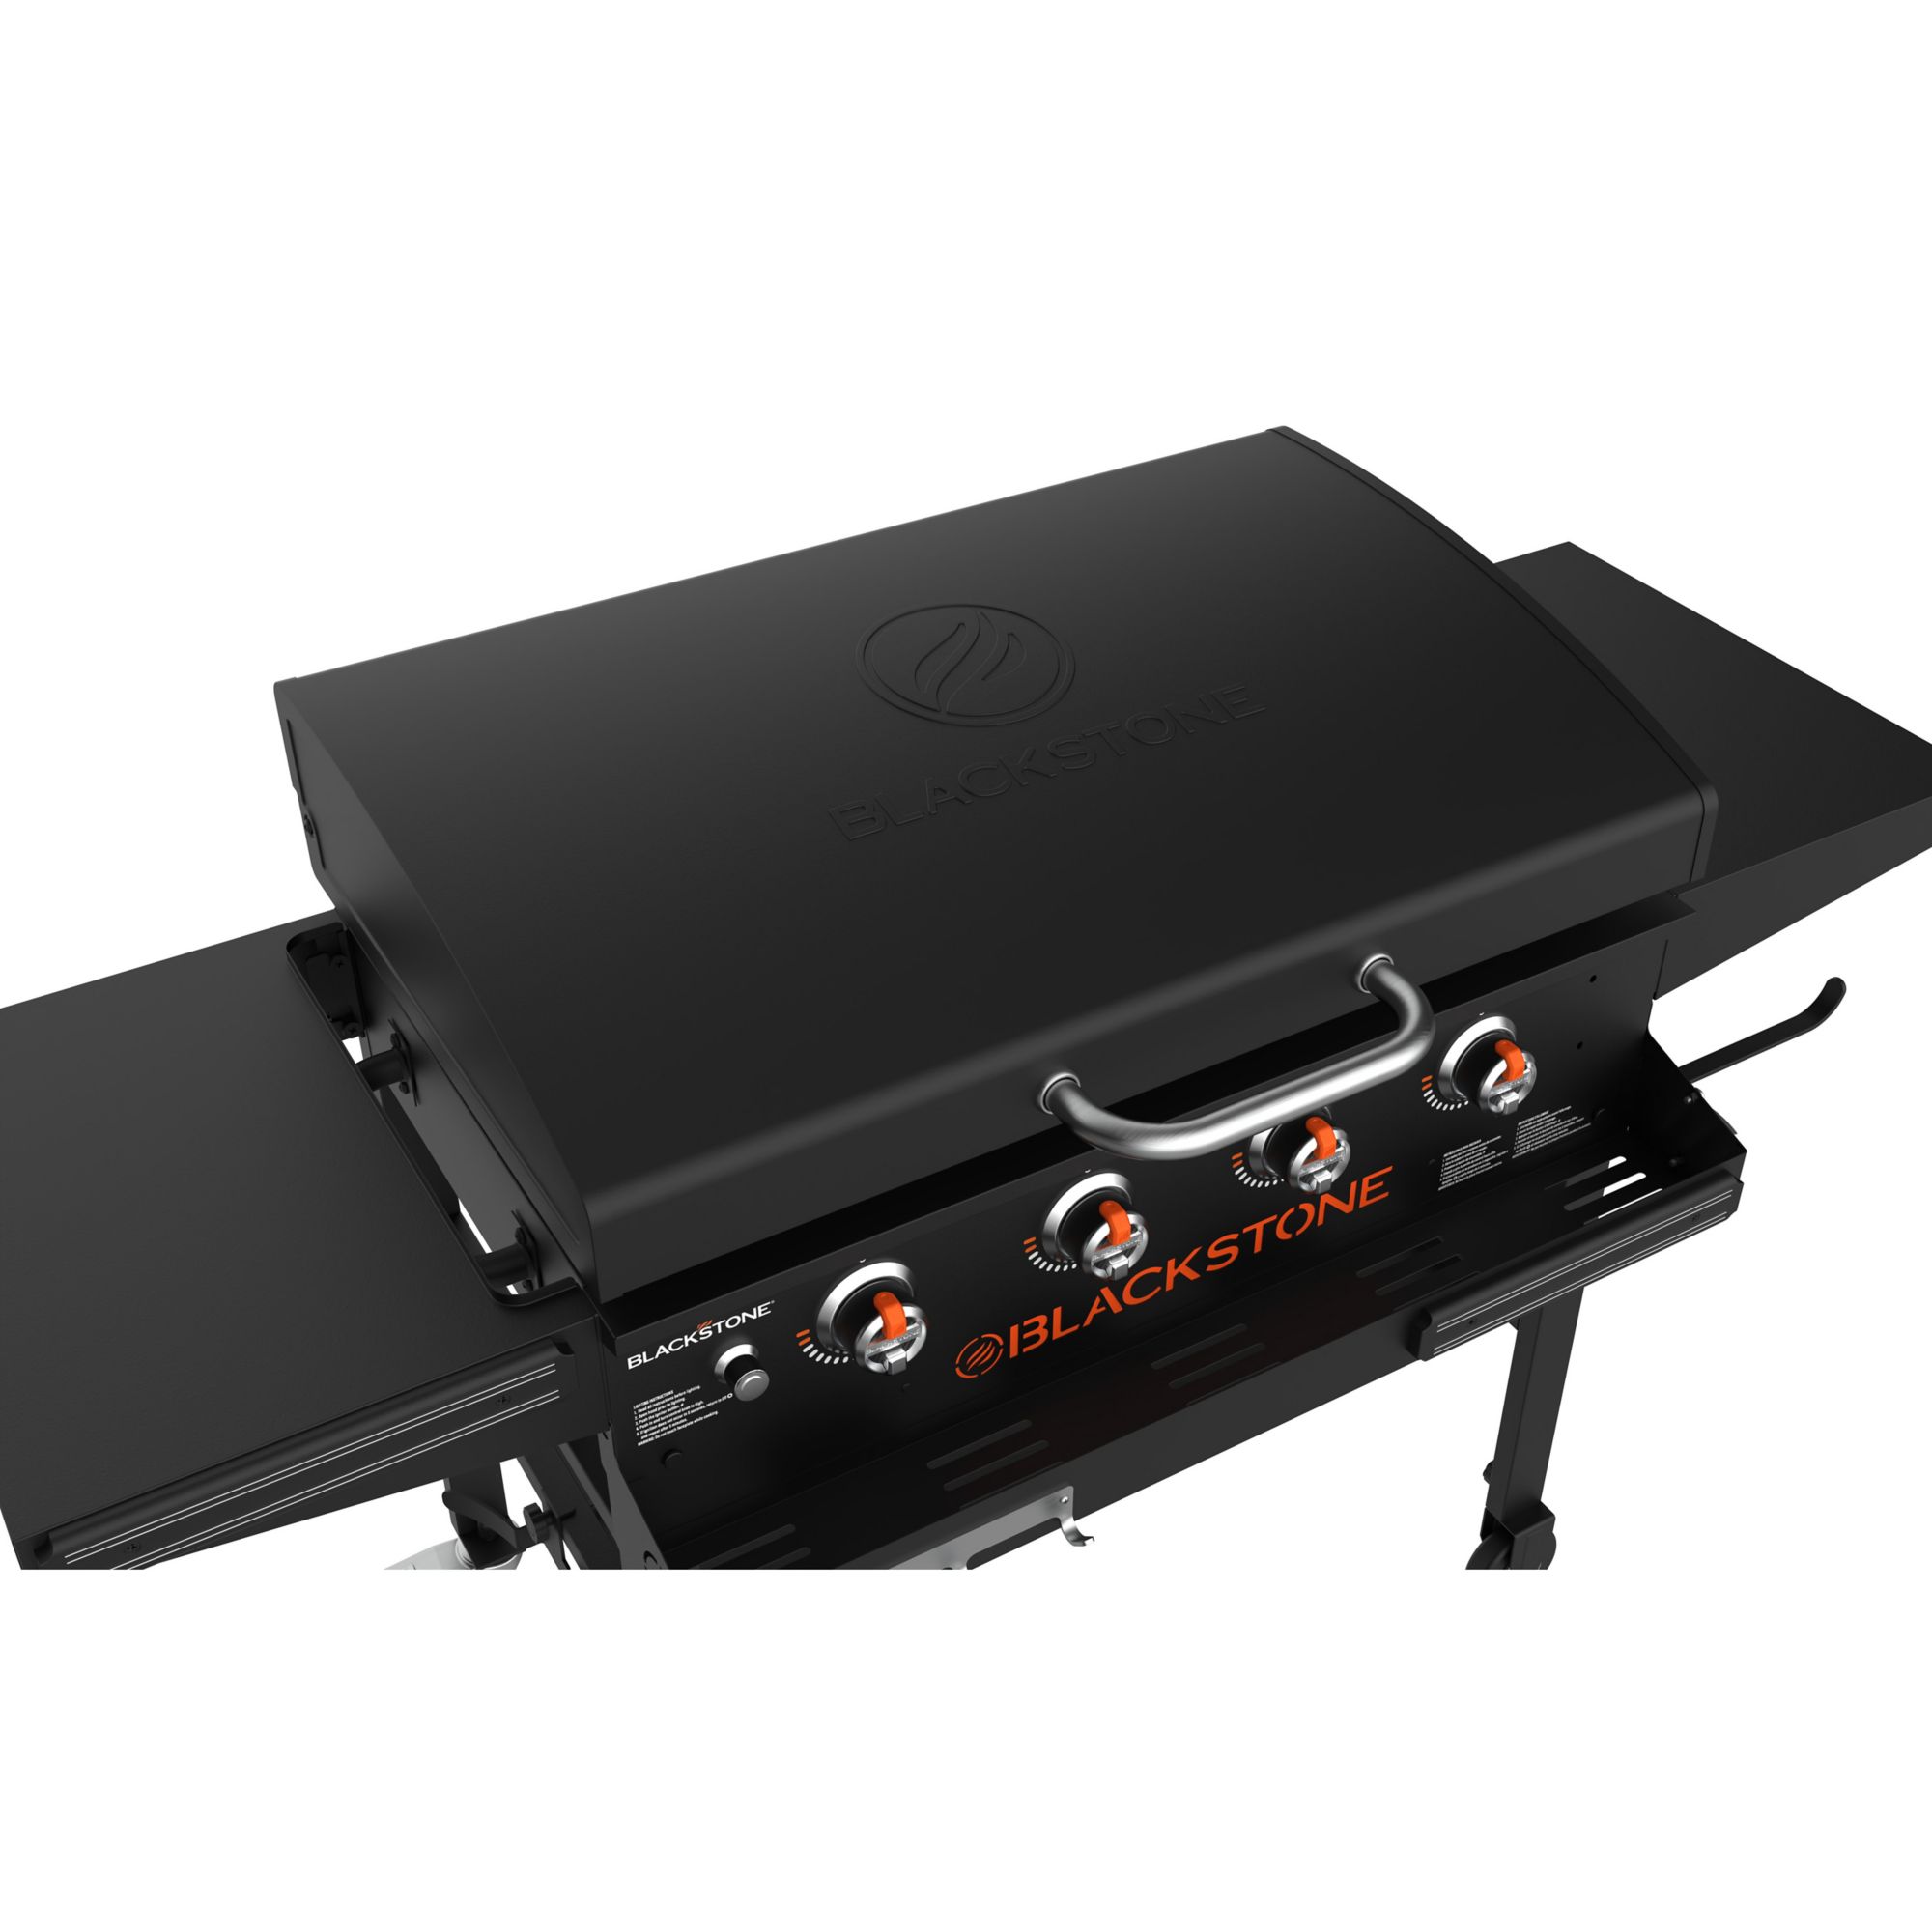 Blackstone 36 Griddle with Integrated Hood Dual Horizontal Folding Shelves Fron